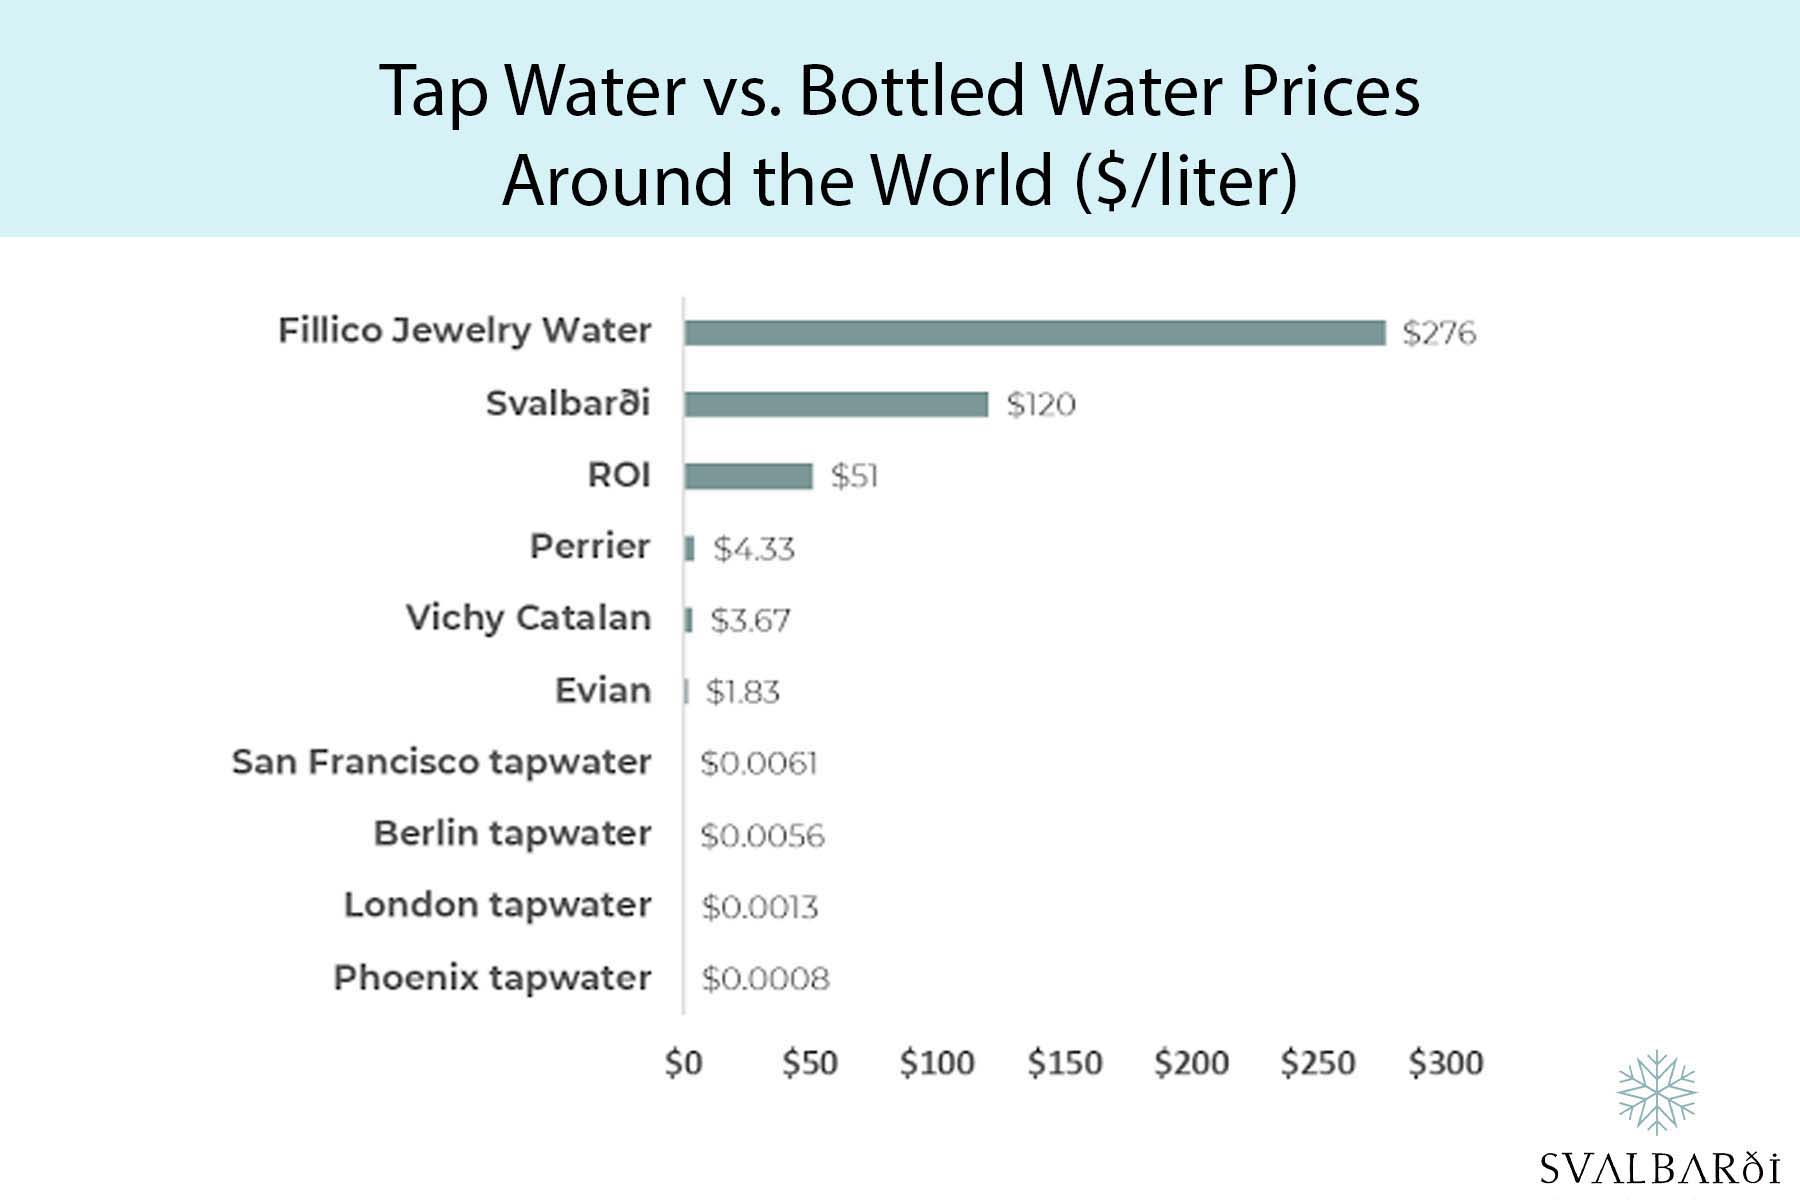 Tap Water vs. Bottled Water: Which Is Better?